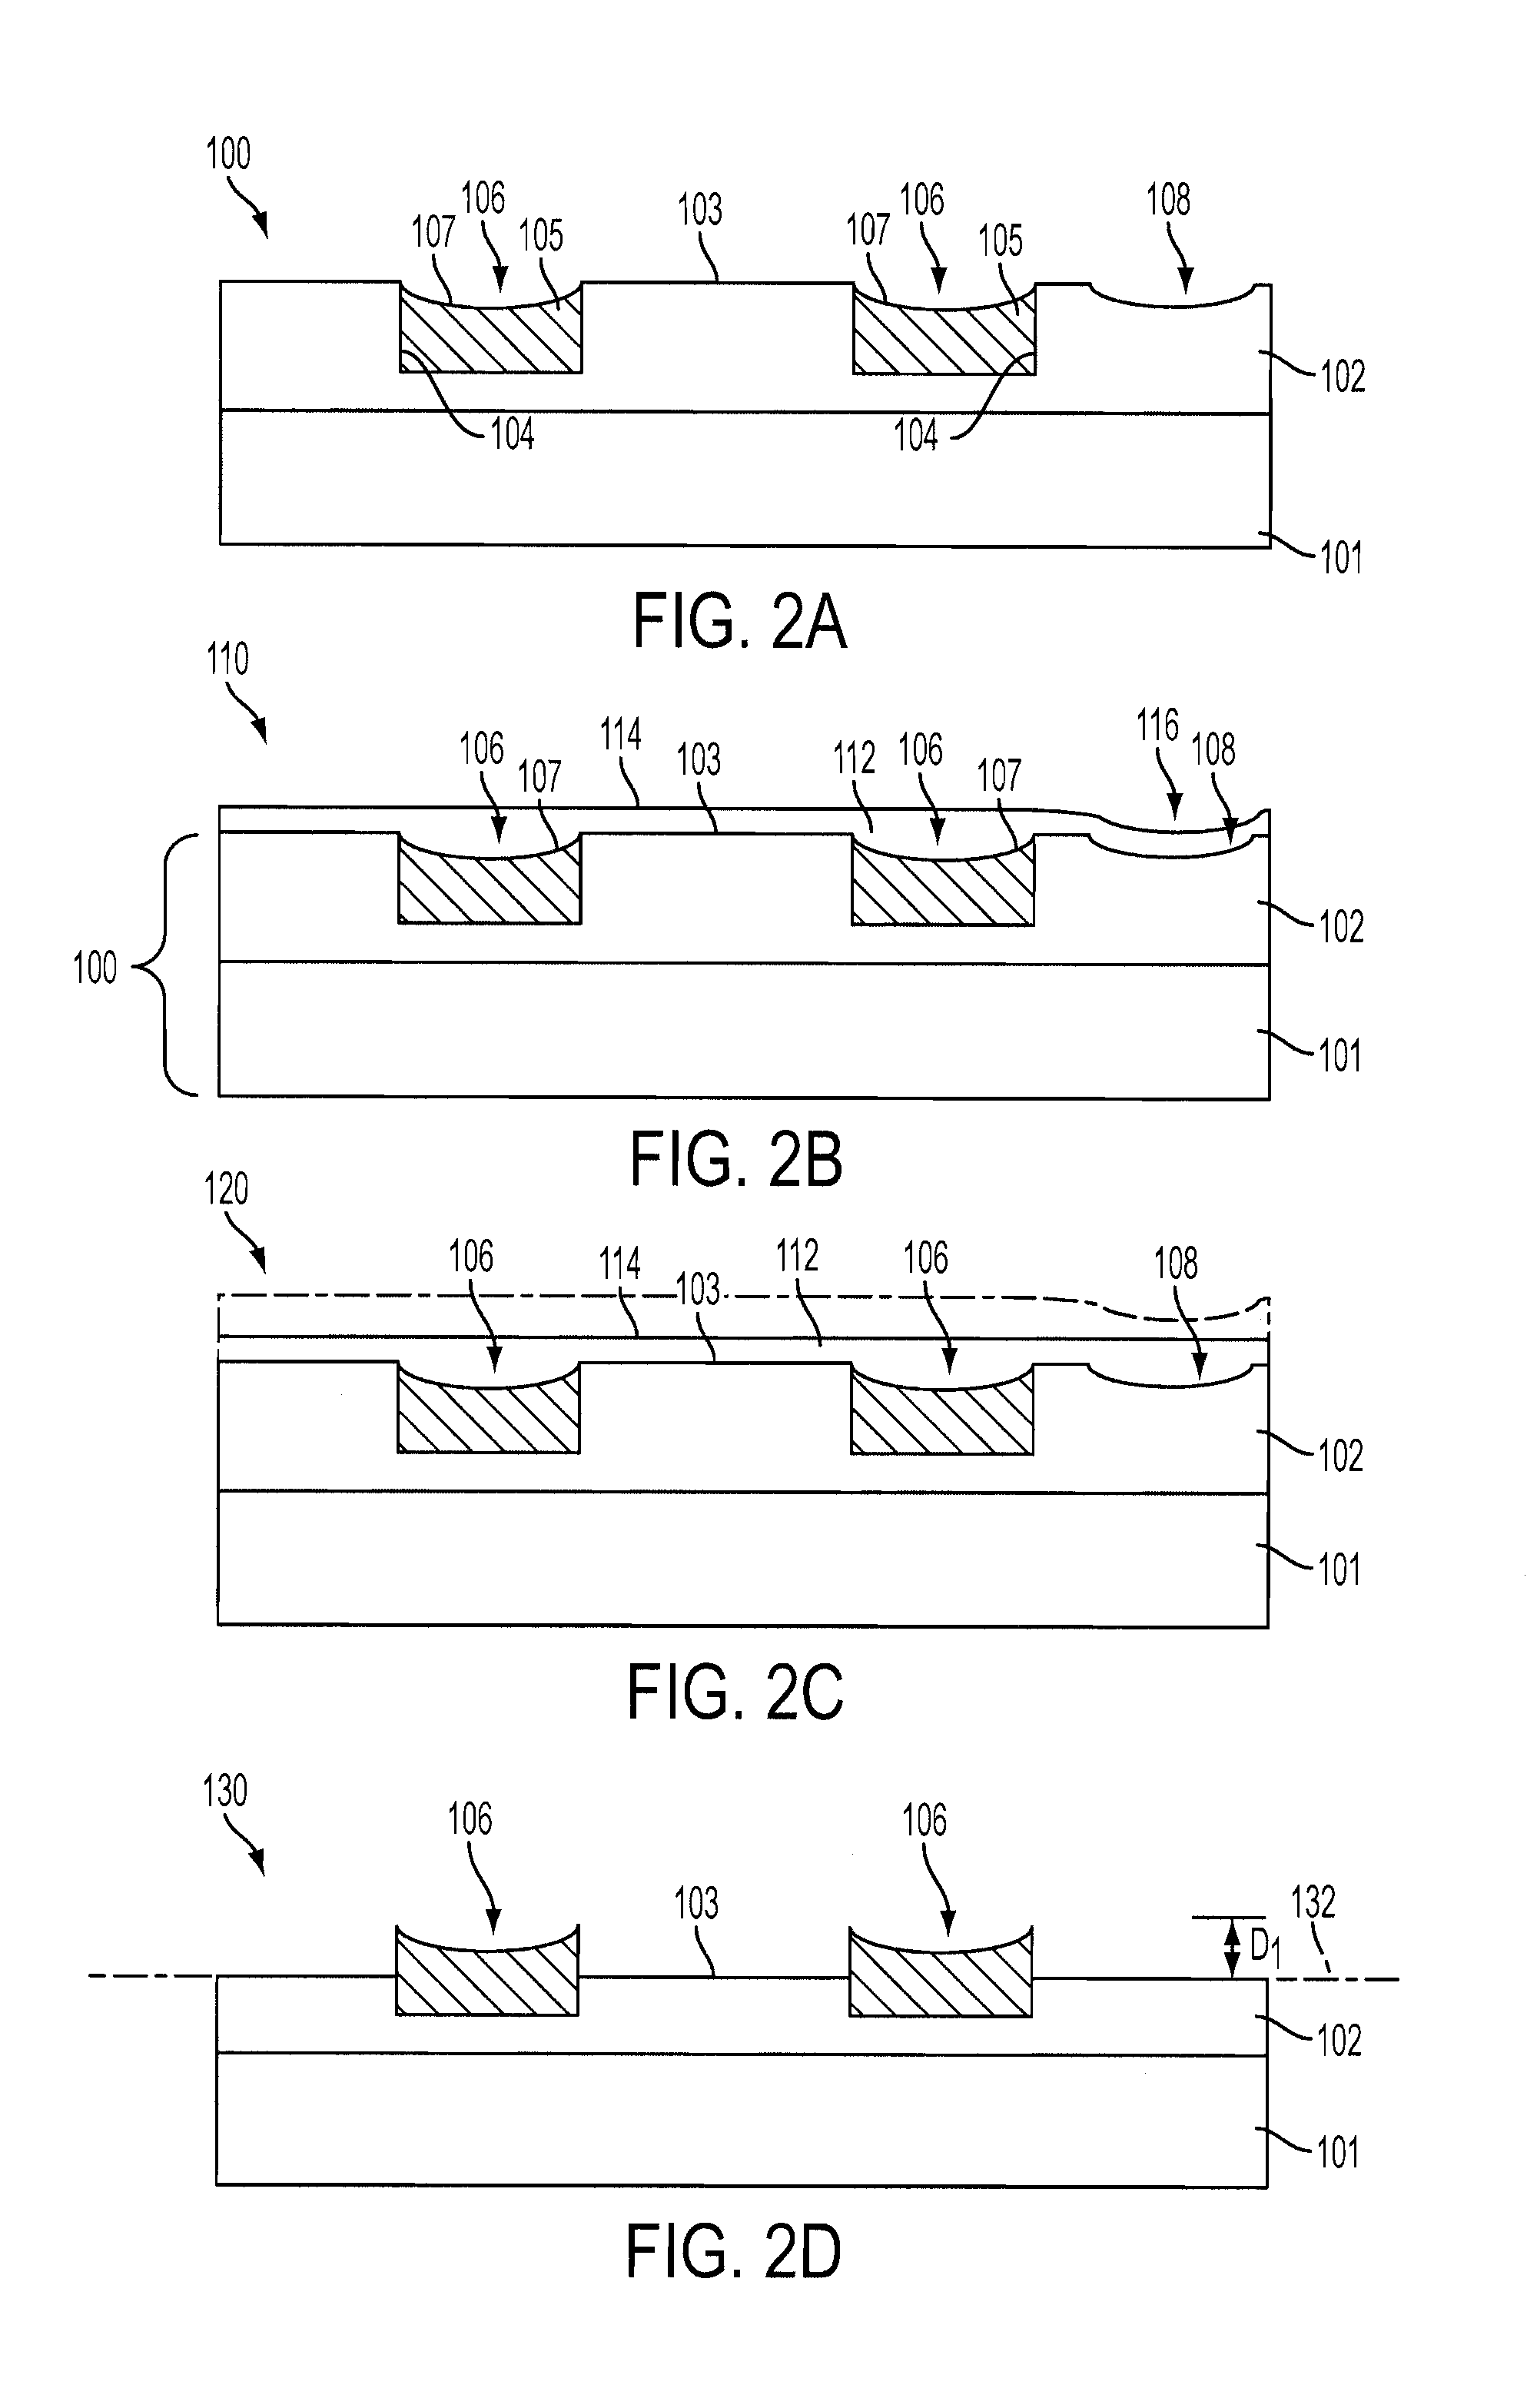 Bonding surfaces for direct bonding of semiconductor structures